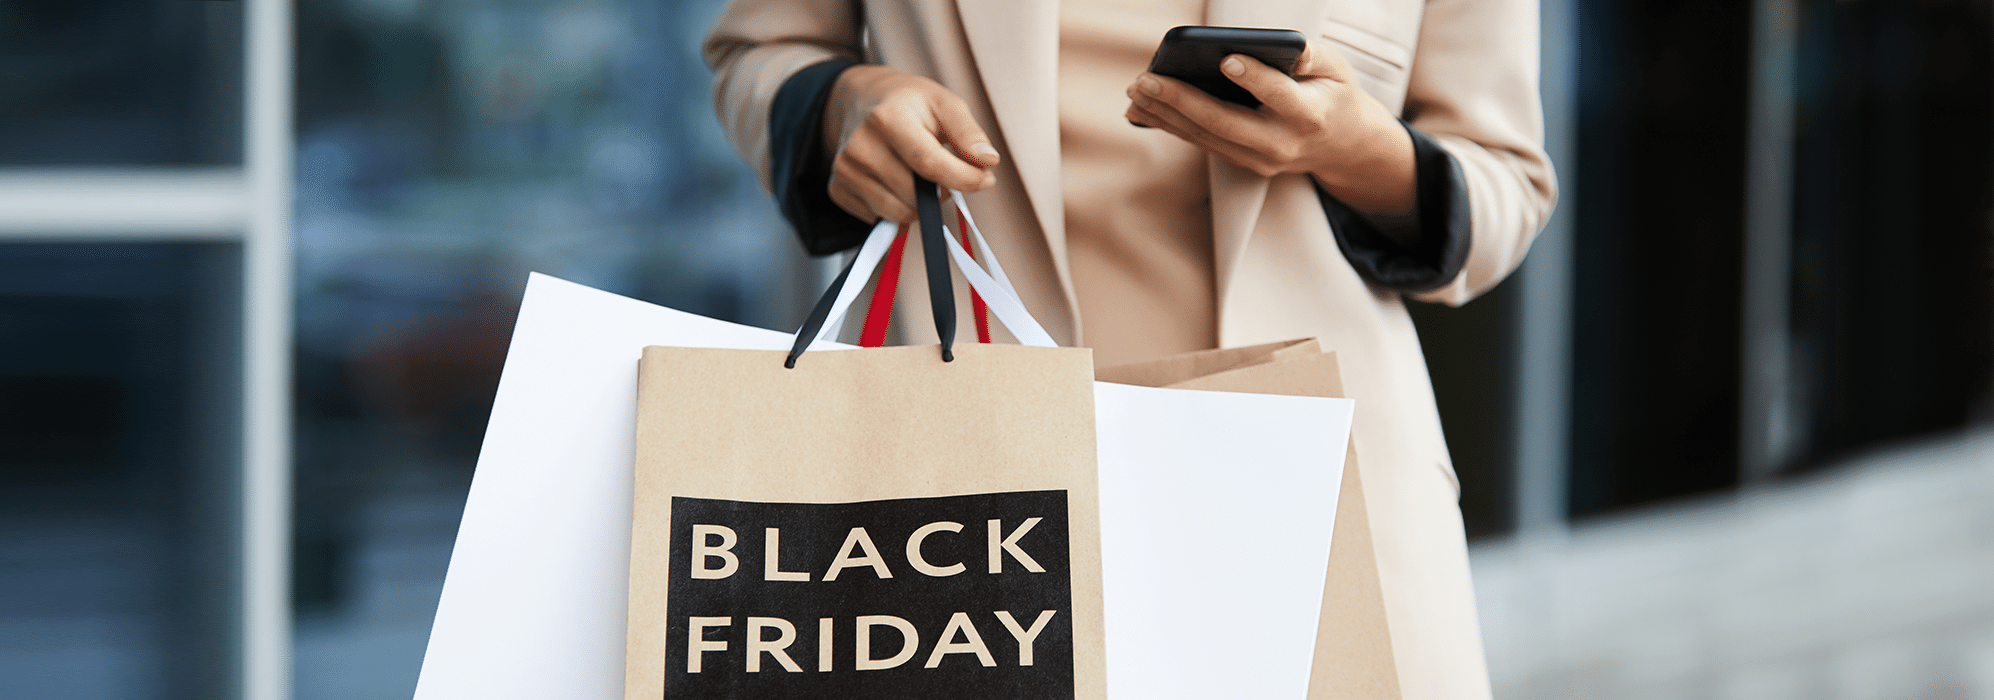 9 Brilliant Black Friday Marketing Tips to Make This Year the Best Yet